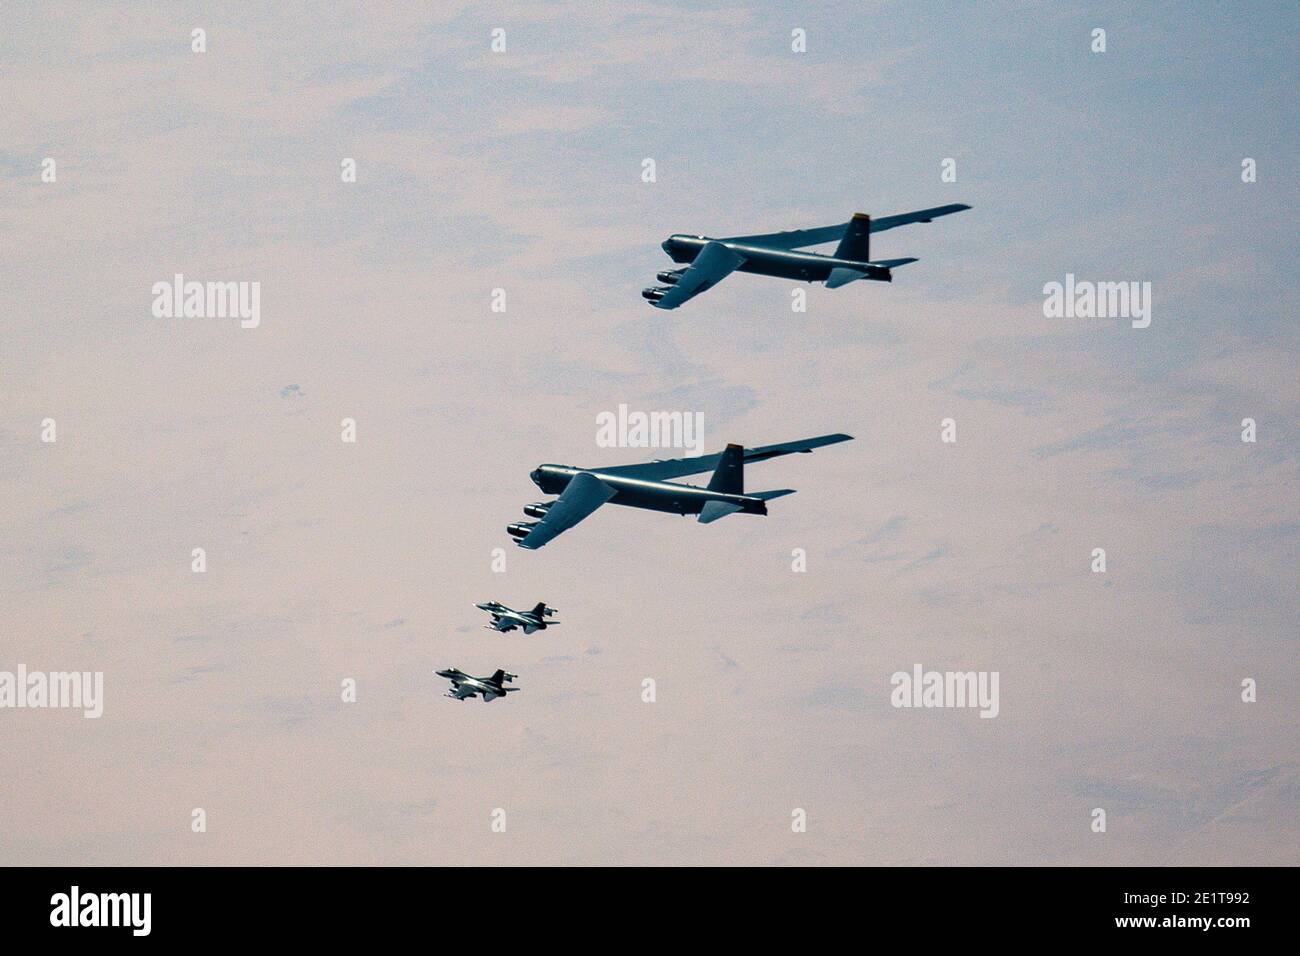 Saudi Arabia, Saudi Arabia. 09th Jan, 2021. U.S. Air Force B-52 Stratofortress strategic bomber aircraft are escorted by U.S. Air Force F-16 Fighting Falcon fighter jets as they fly over Saudi airspace January 7, 2021 in Saudi Arabia. The bomber and escort is a show of force mission as a message to Iran. Credit: Planetpix/Alamy Live News Stock Photo